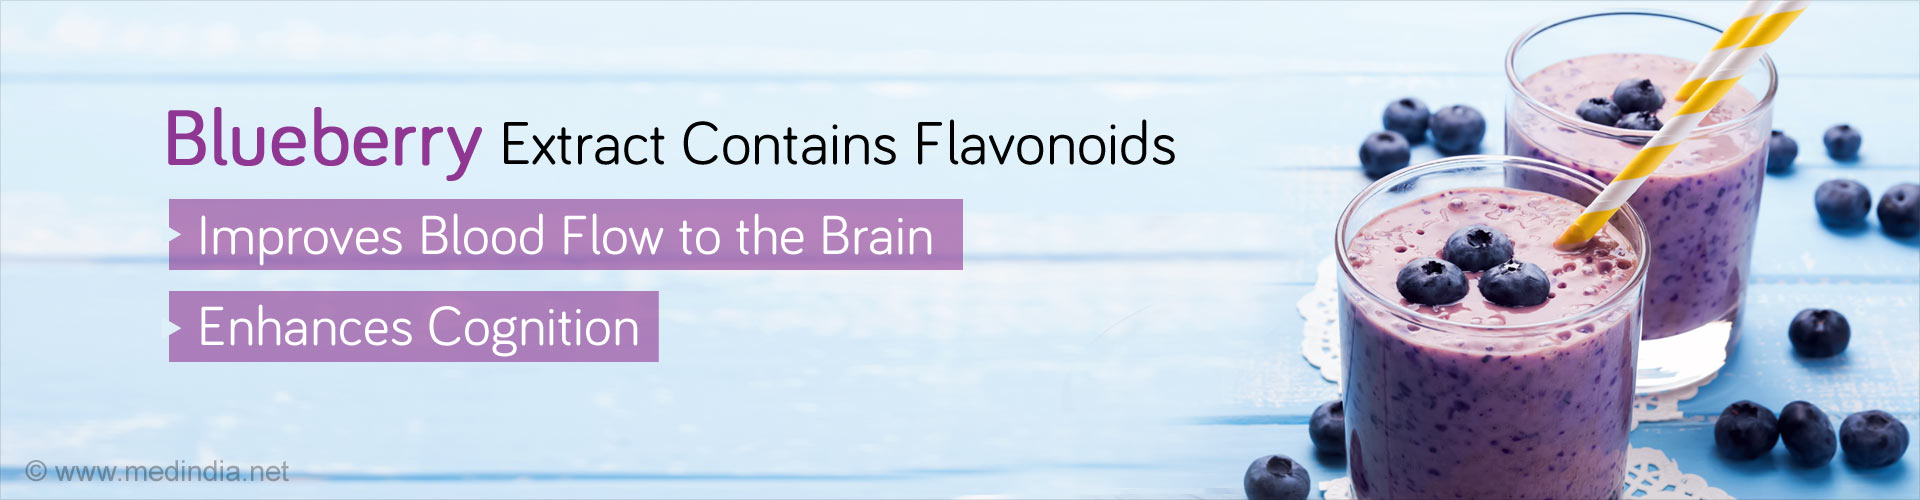 Blueberry extract contains flavonoids
- improves blood flow to the brain
- enhances cognition
